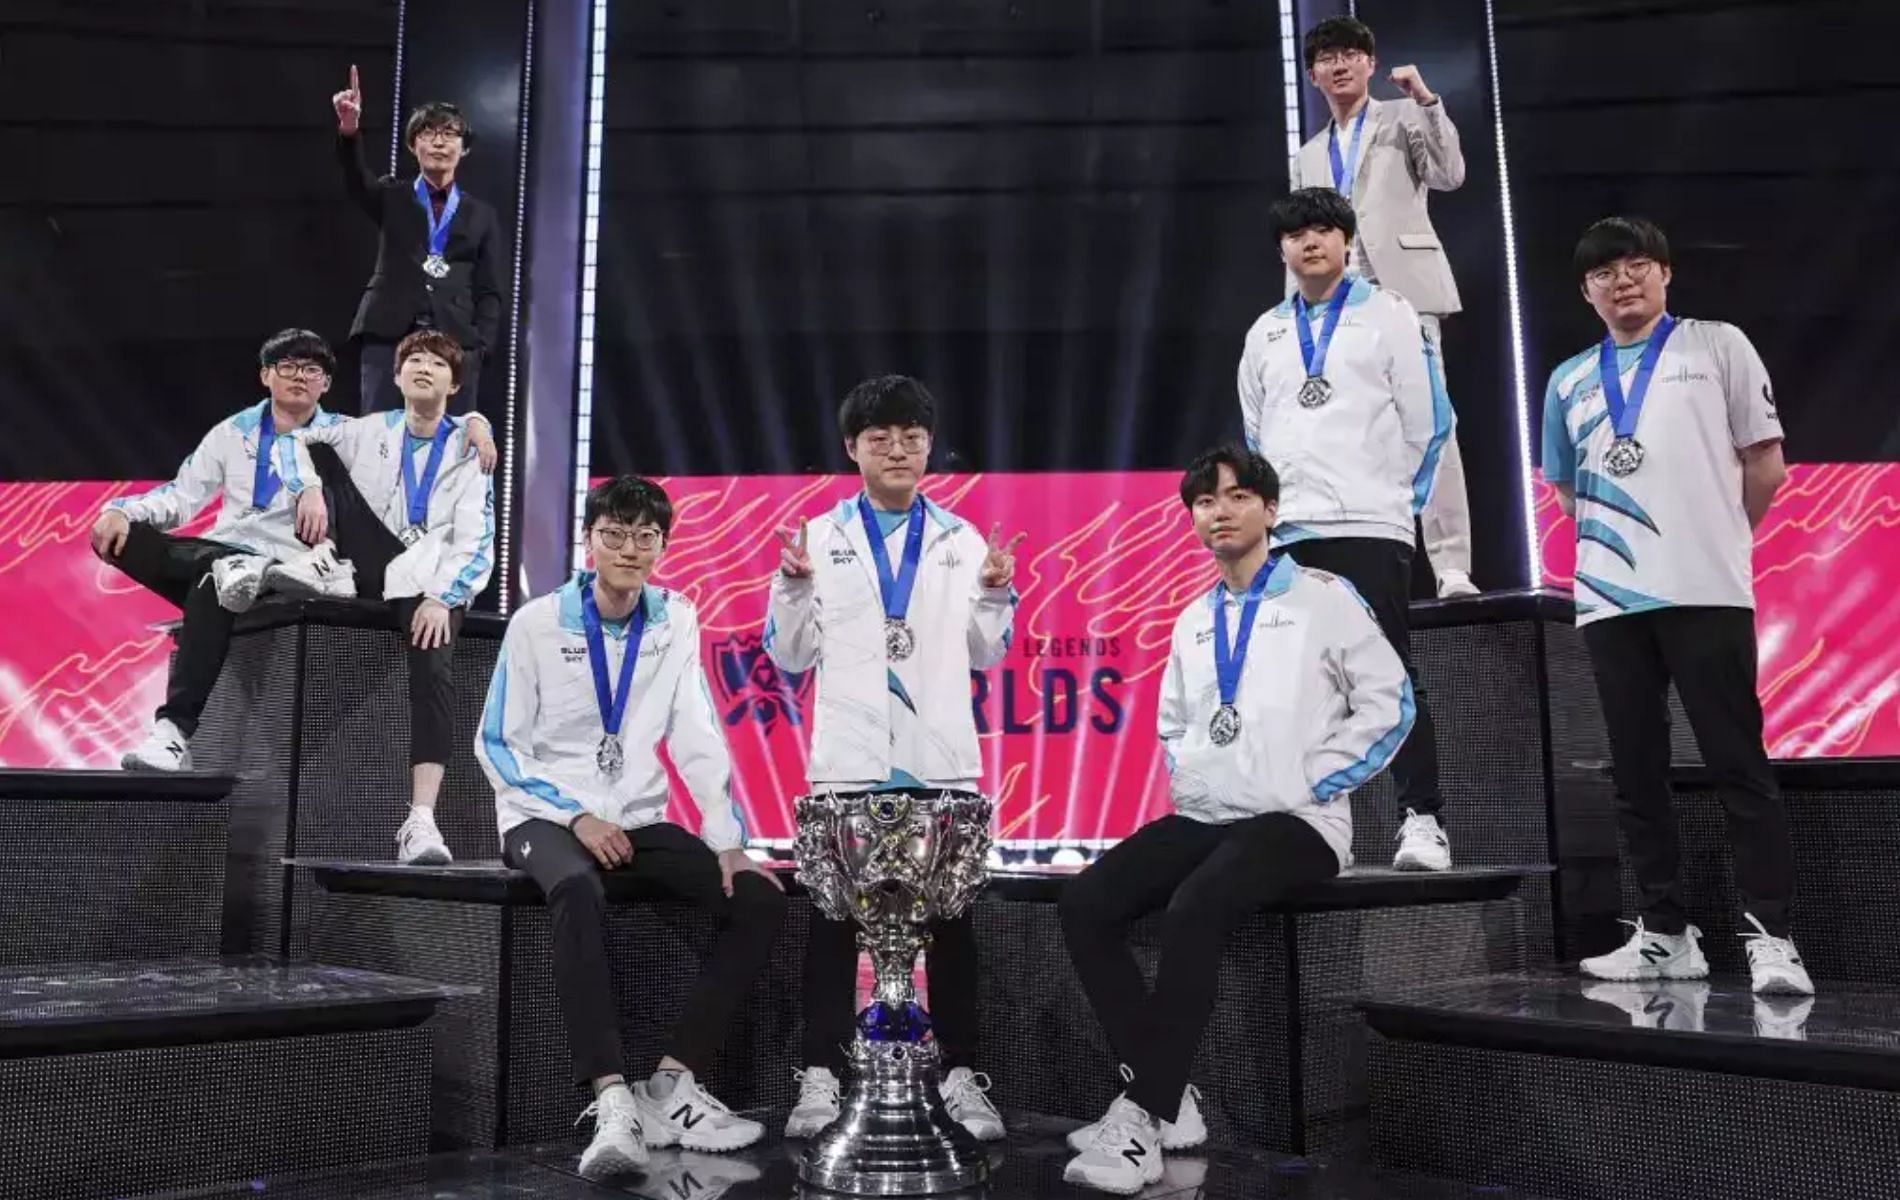 2020 League of Legends Champions DAMWON Gaming (Image via Riot Games)